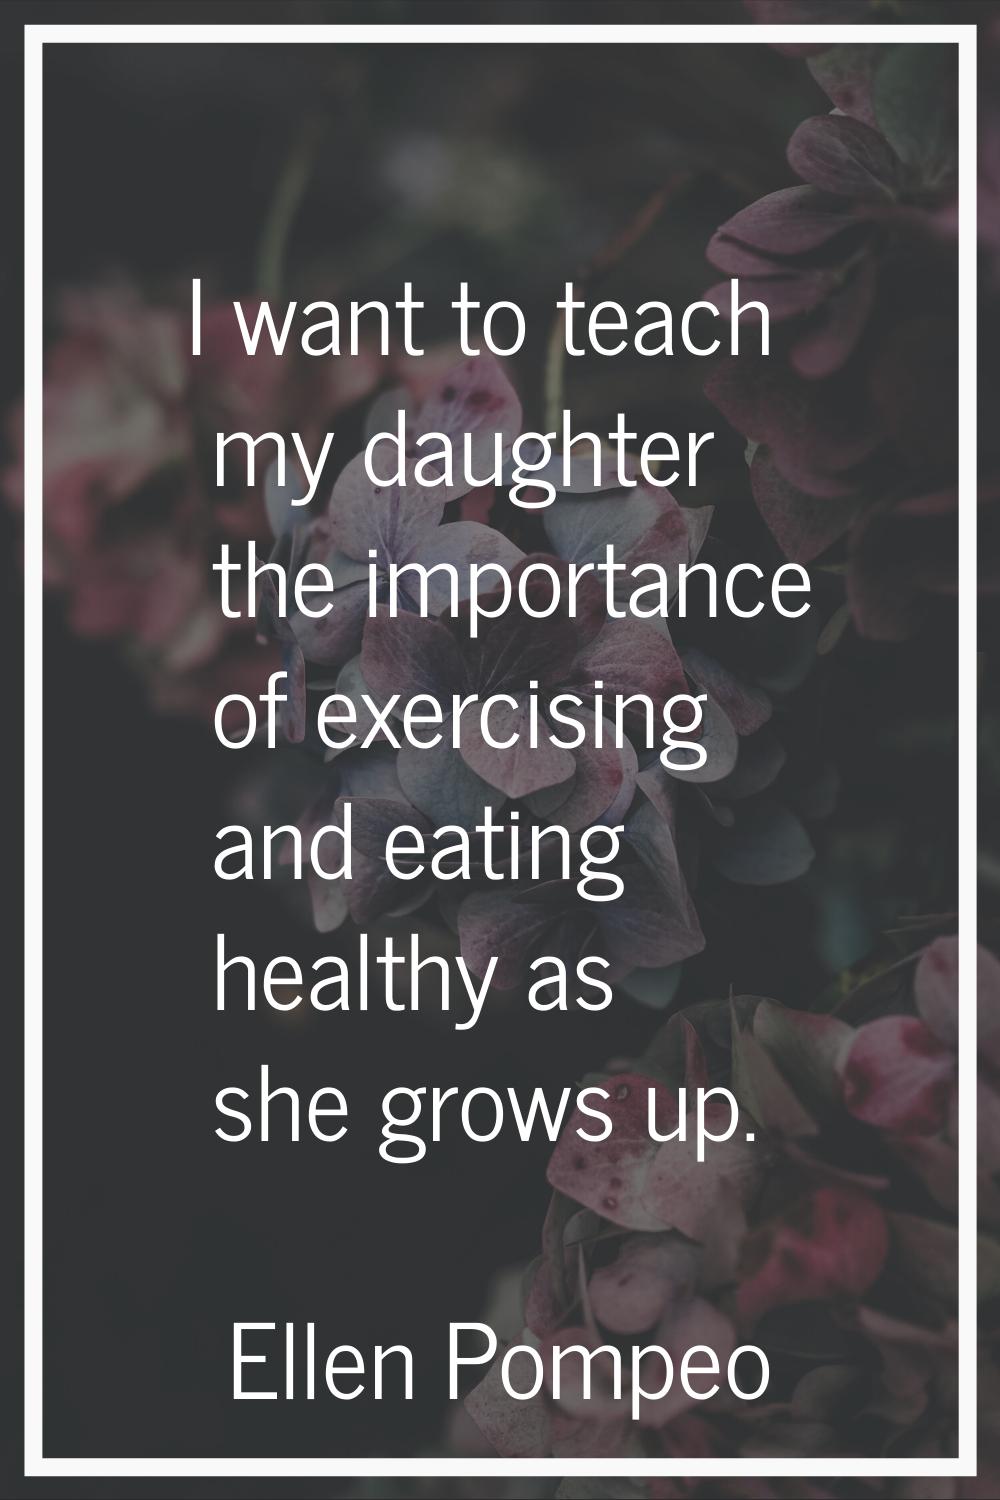 I want to teach my daughter the importance of exercising and eating healthy as she grows up.